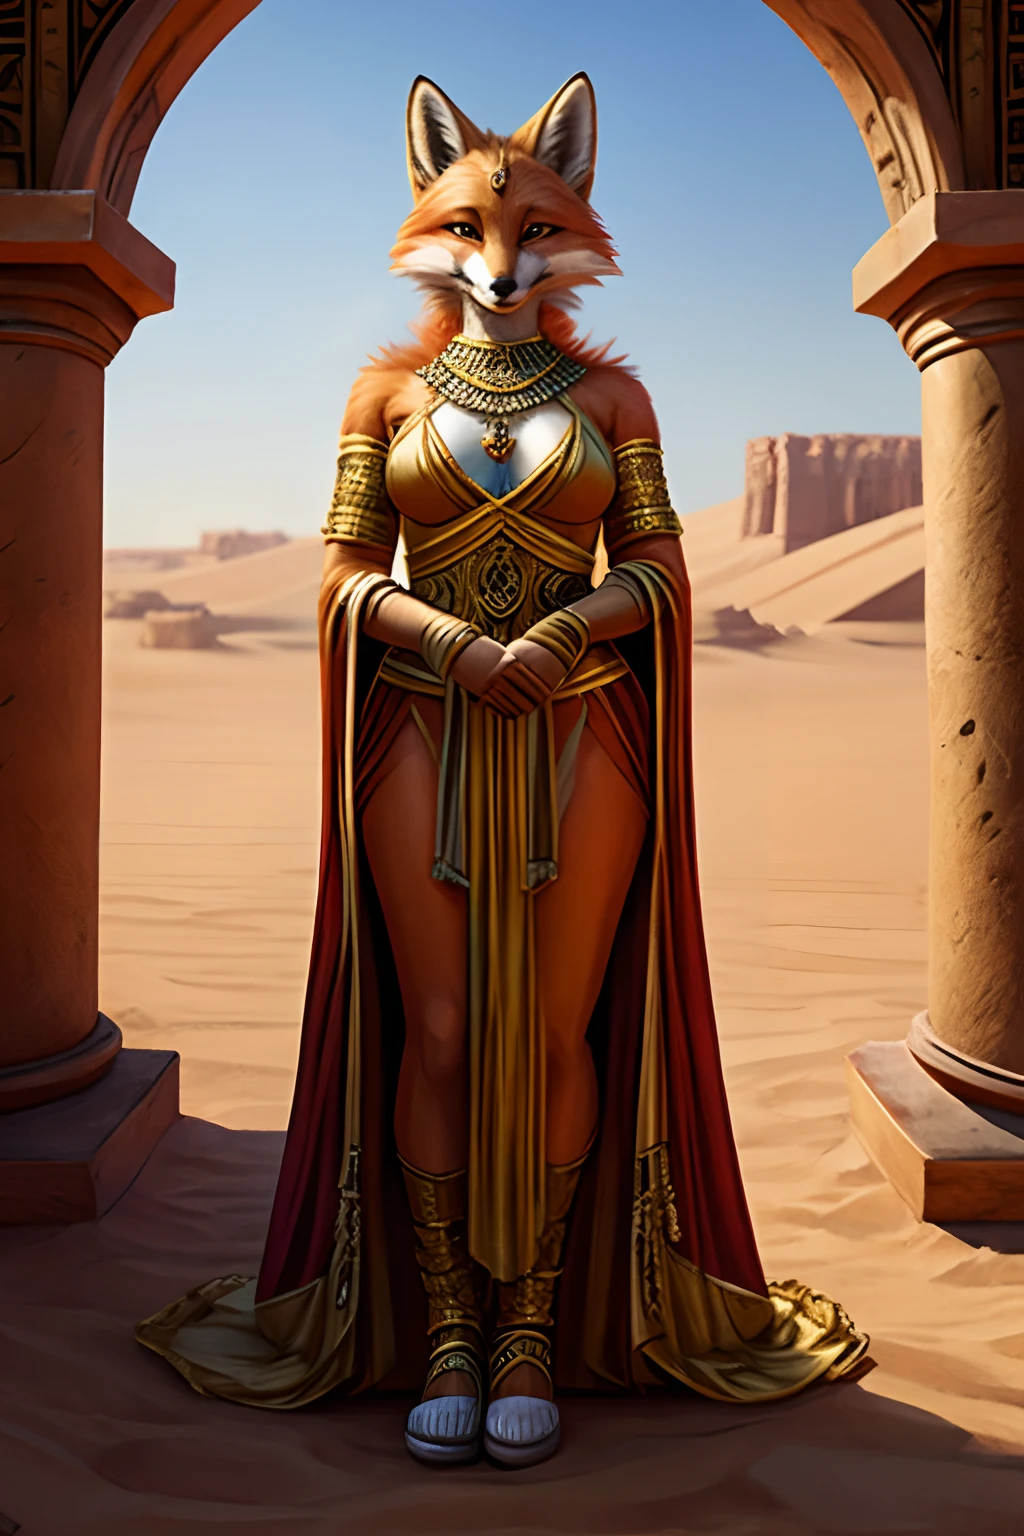 demure fox queen with a deviant mind wearing revealing royal clothes that would befit a kingdom in a desert